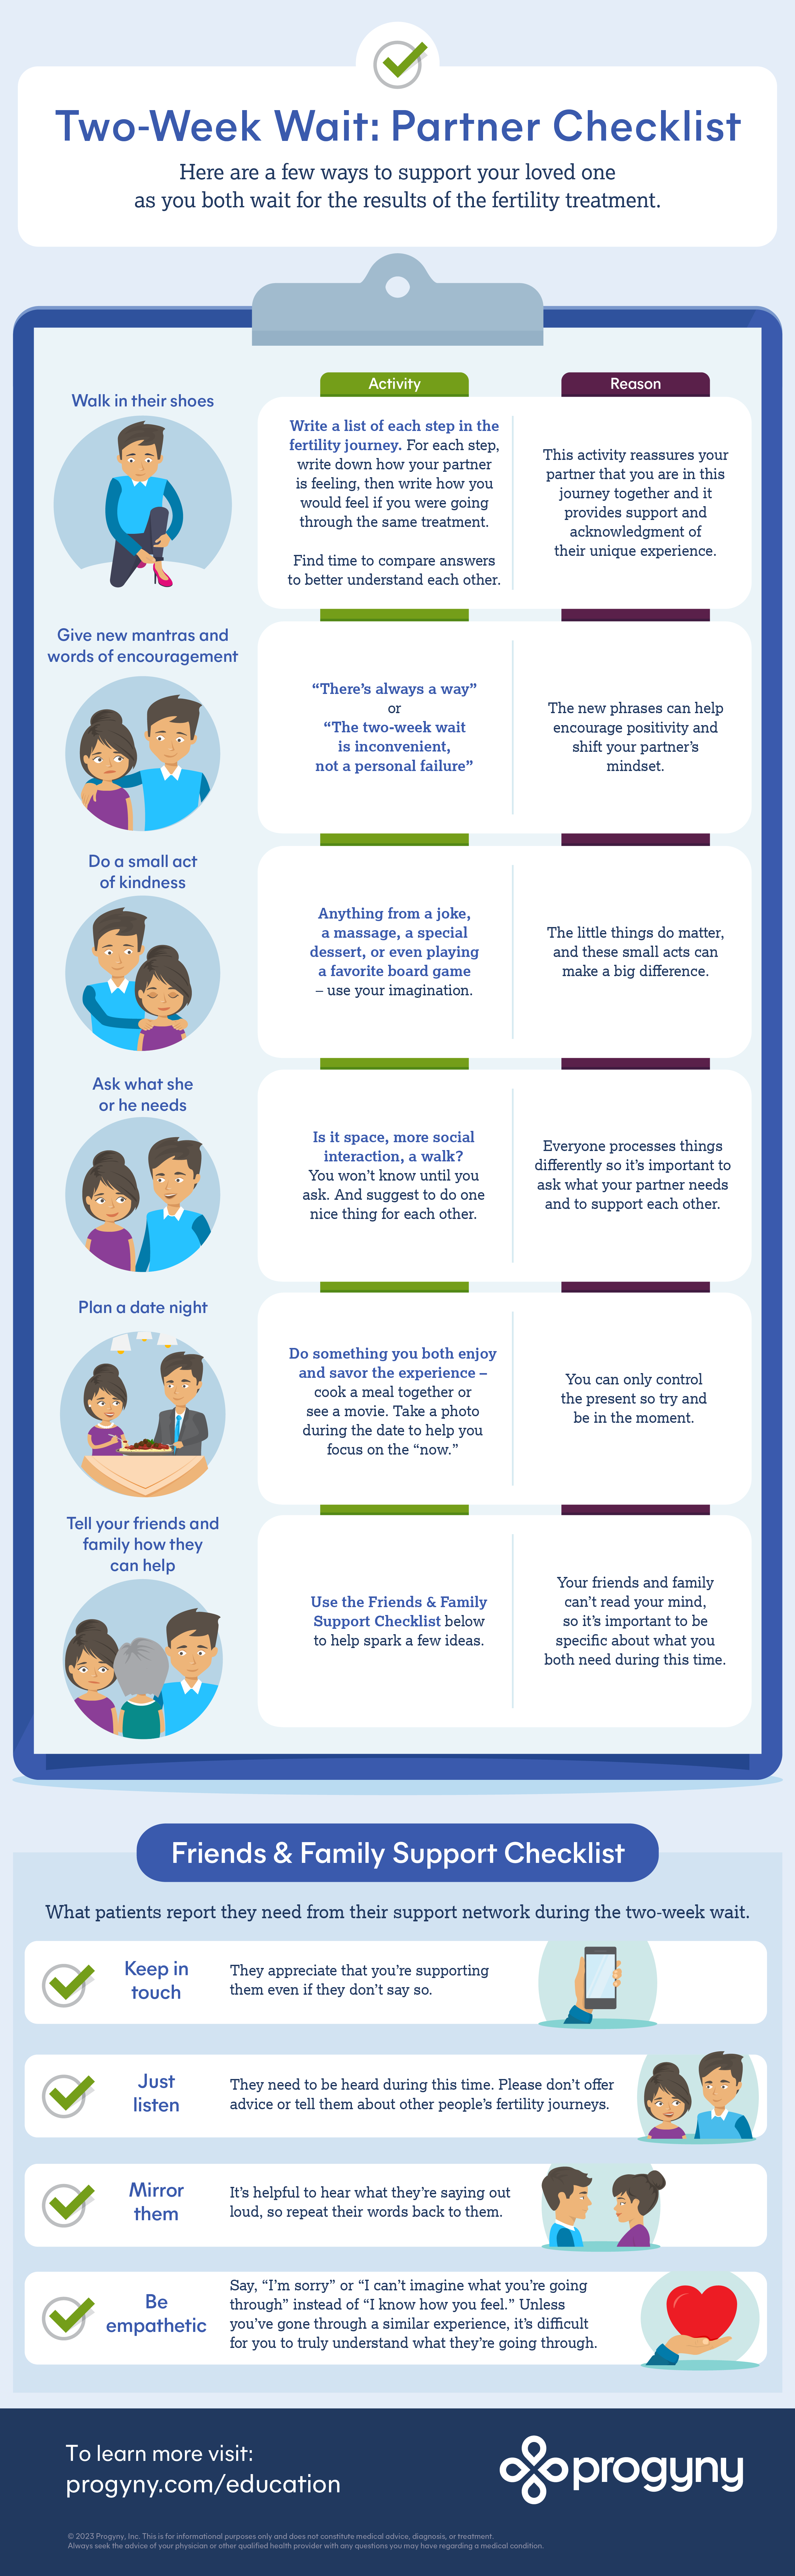 Two week wait: Partner Checklist - this infographic describes a few ways for a partner can support your loved one as you both wait for the results of the fertility treatment